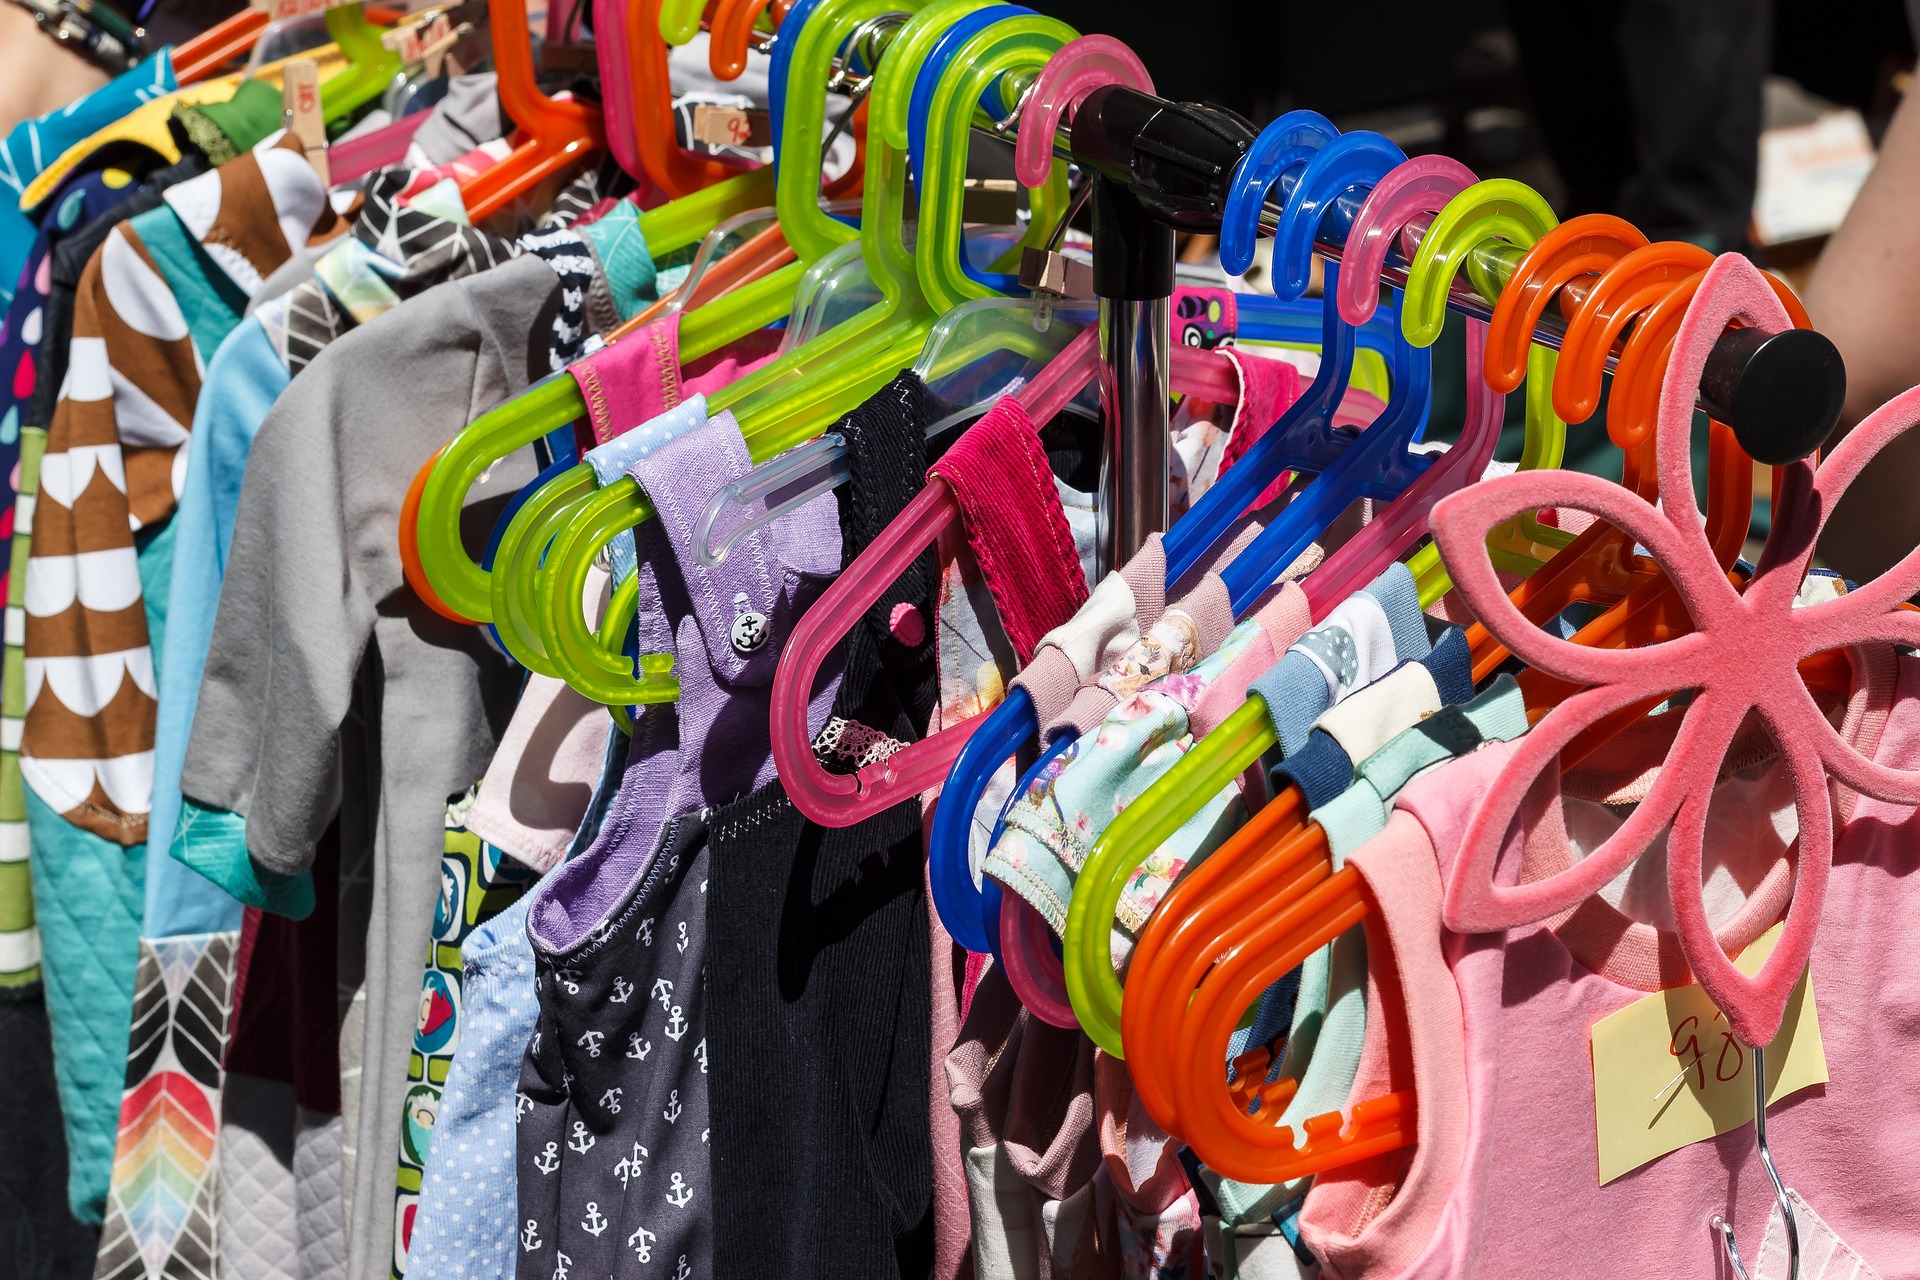 childrens clothing on hangers